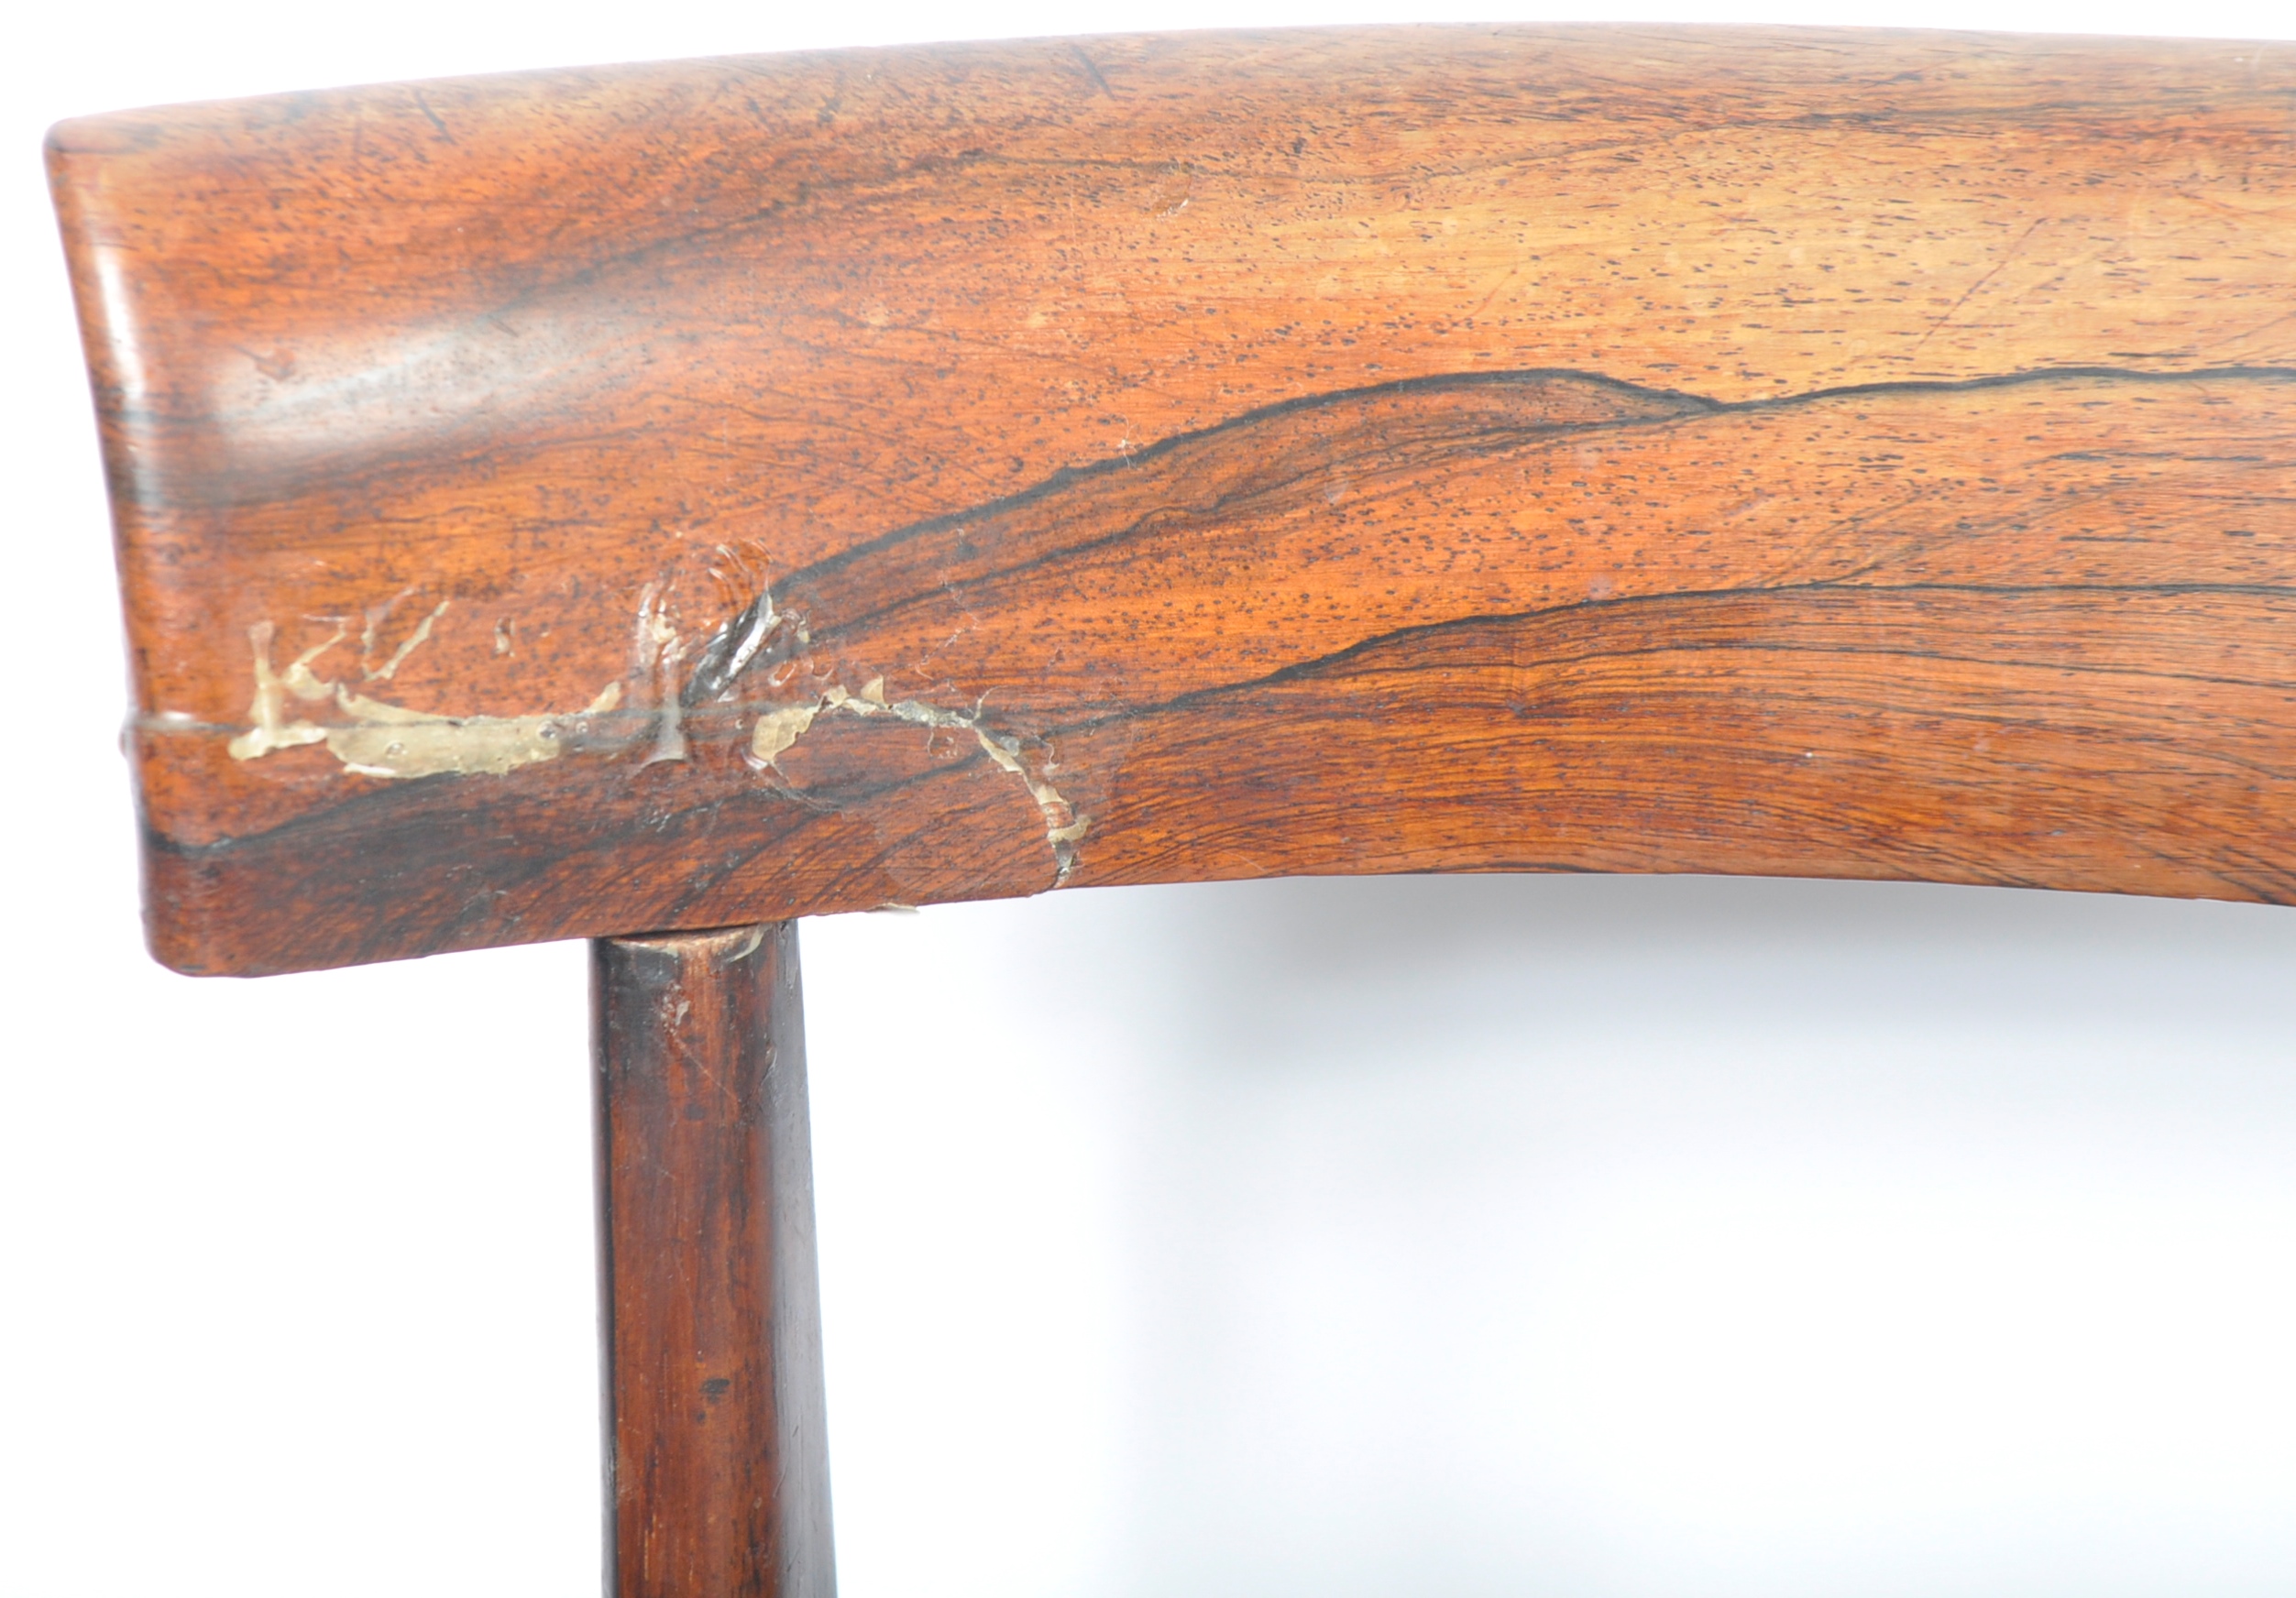 SIX 19TH CENTURY ROSEWOOD DINING CHAIRS IN THE GILLOWS MANNER - Image 6 of 11